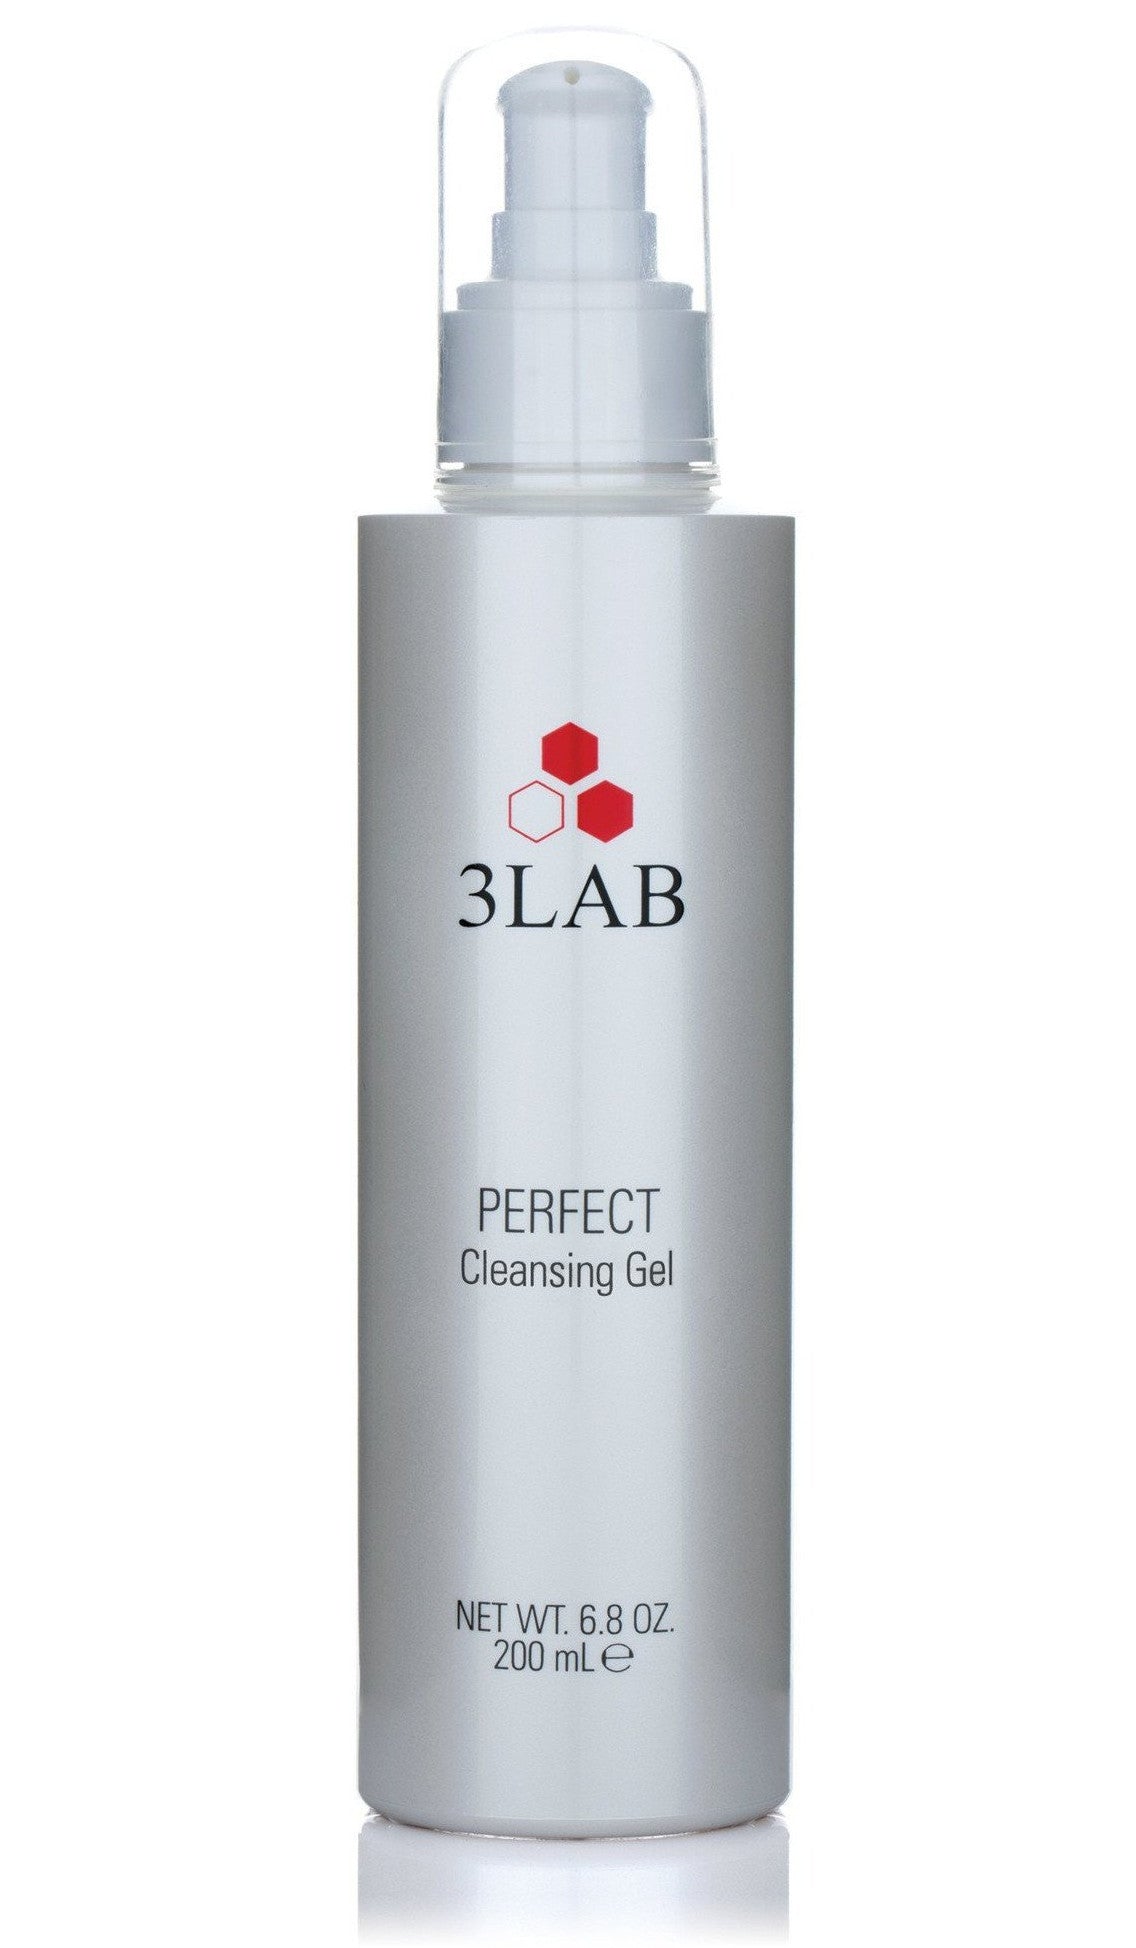 3LAB Perfect Cleansing Gel - eCosmeticWorld